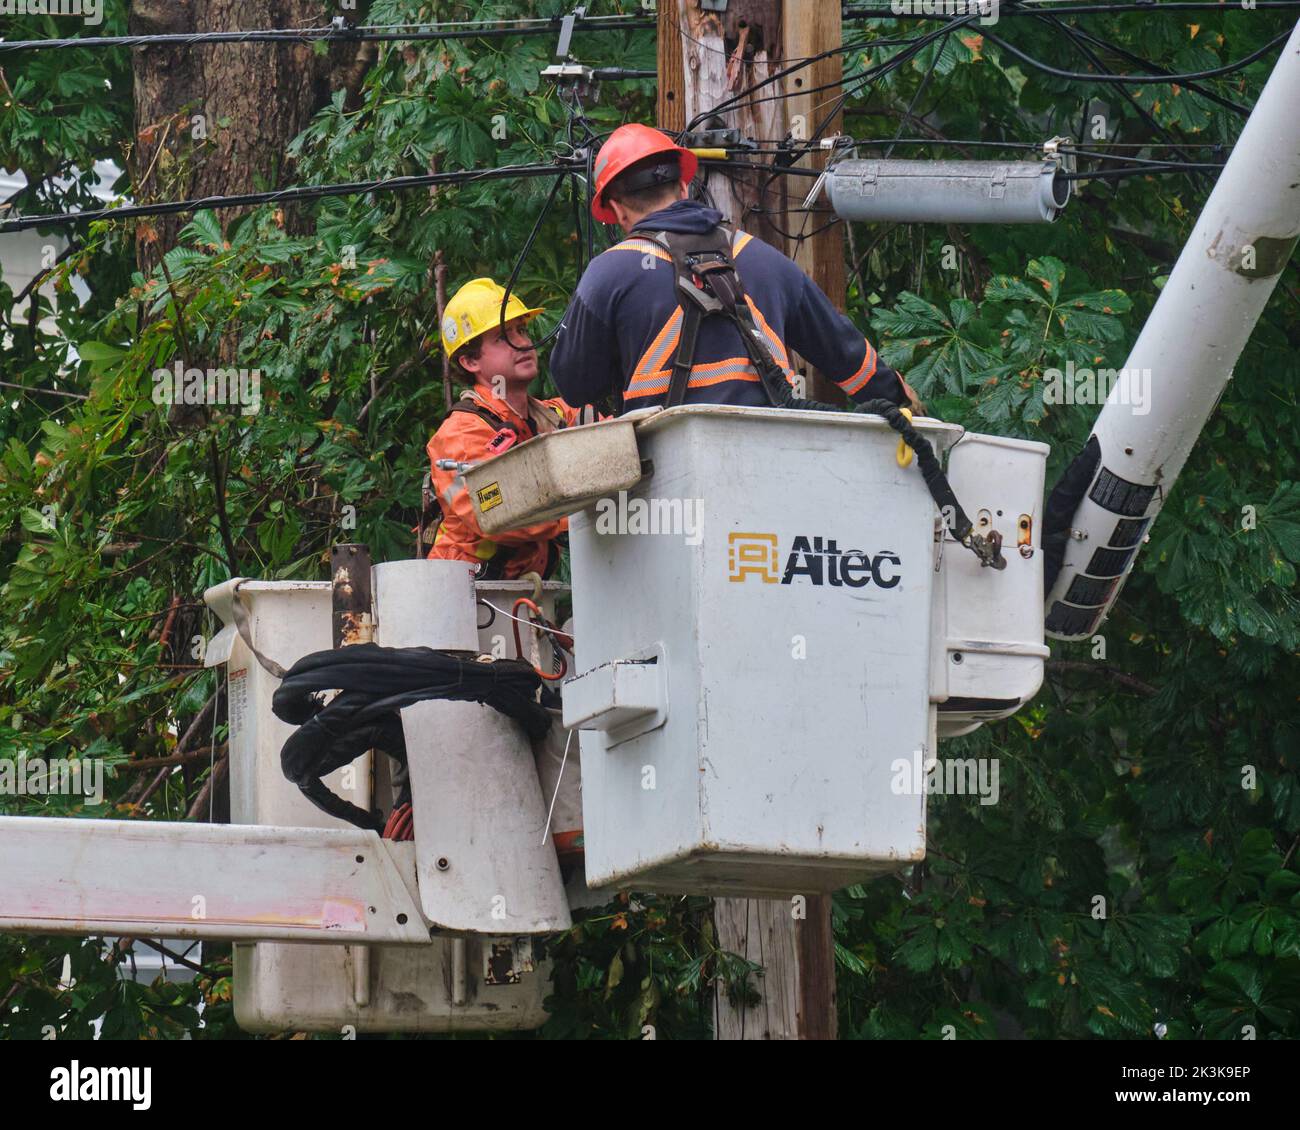 Halifax, Nova Scotia, Canada. September 27th, 2022. NS Power crews at work reattaching a broken electrical pole in Halifax. With over one quarter of the population of the Province still out of power for now more than 3.5 days the long and slow process of repairing the grid continues after the passage of Hurricane. Yesterday the province announced a $100 per household support for those who have lost power for over 48 hours. Credit: meanderingemu/Alamy Live News Stock Photo